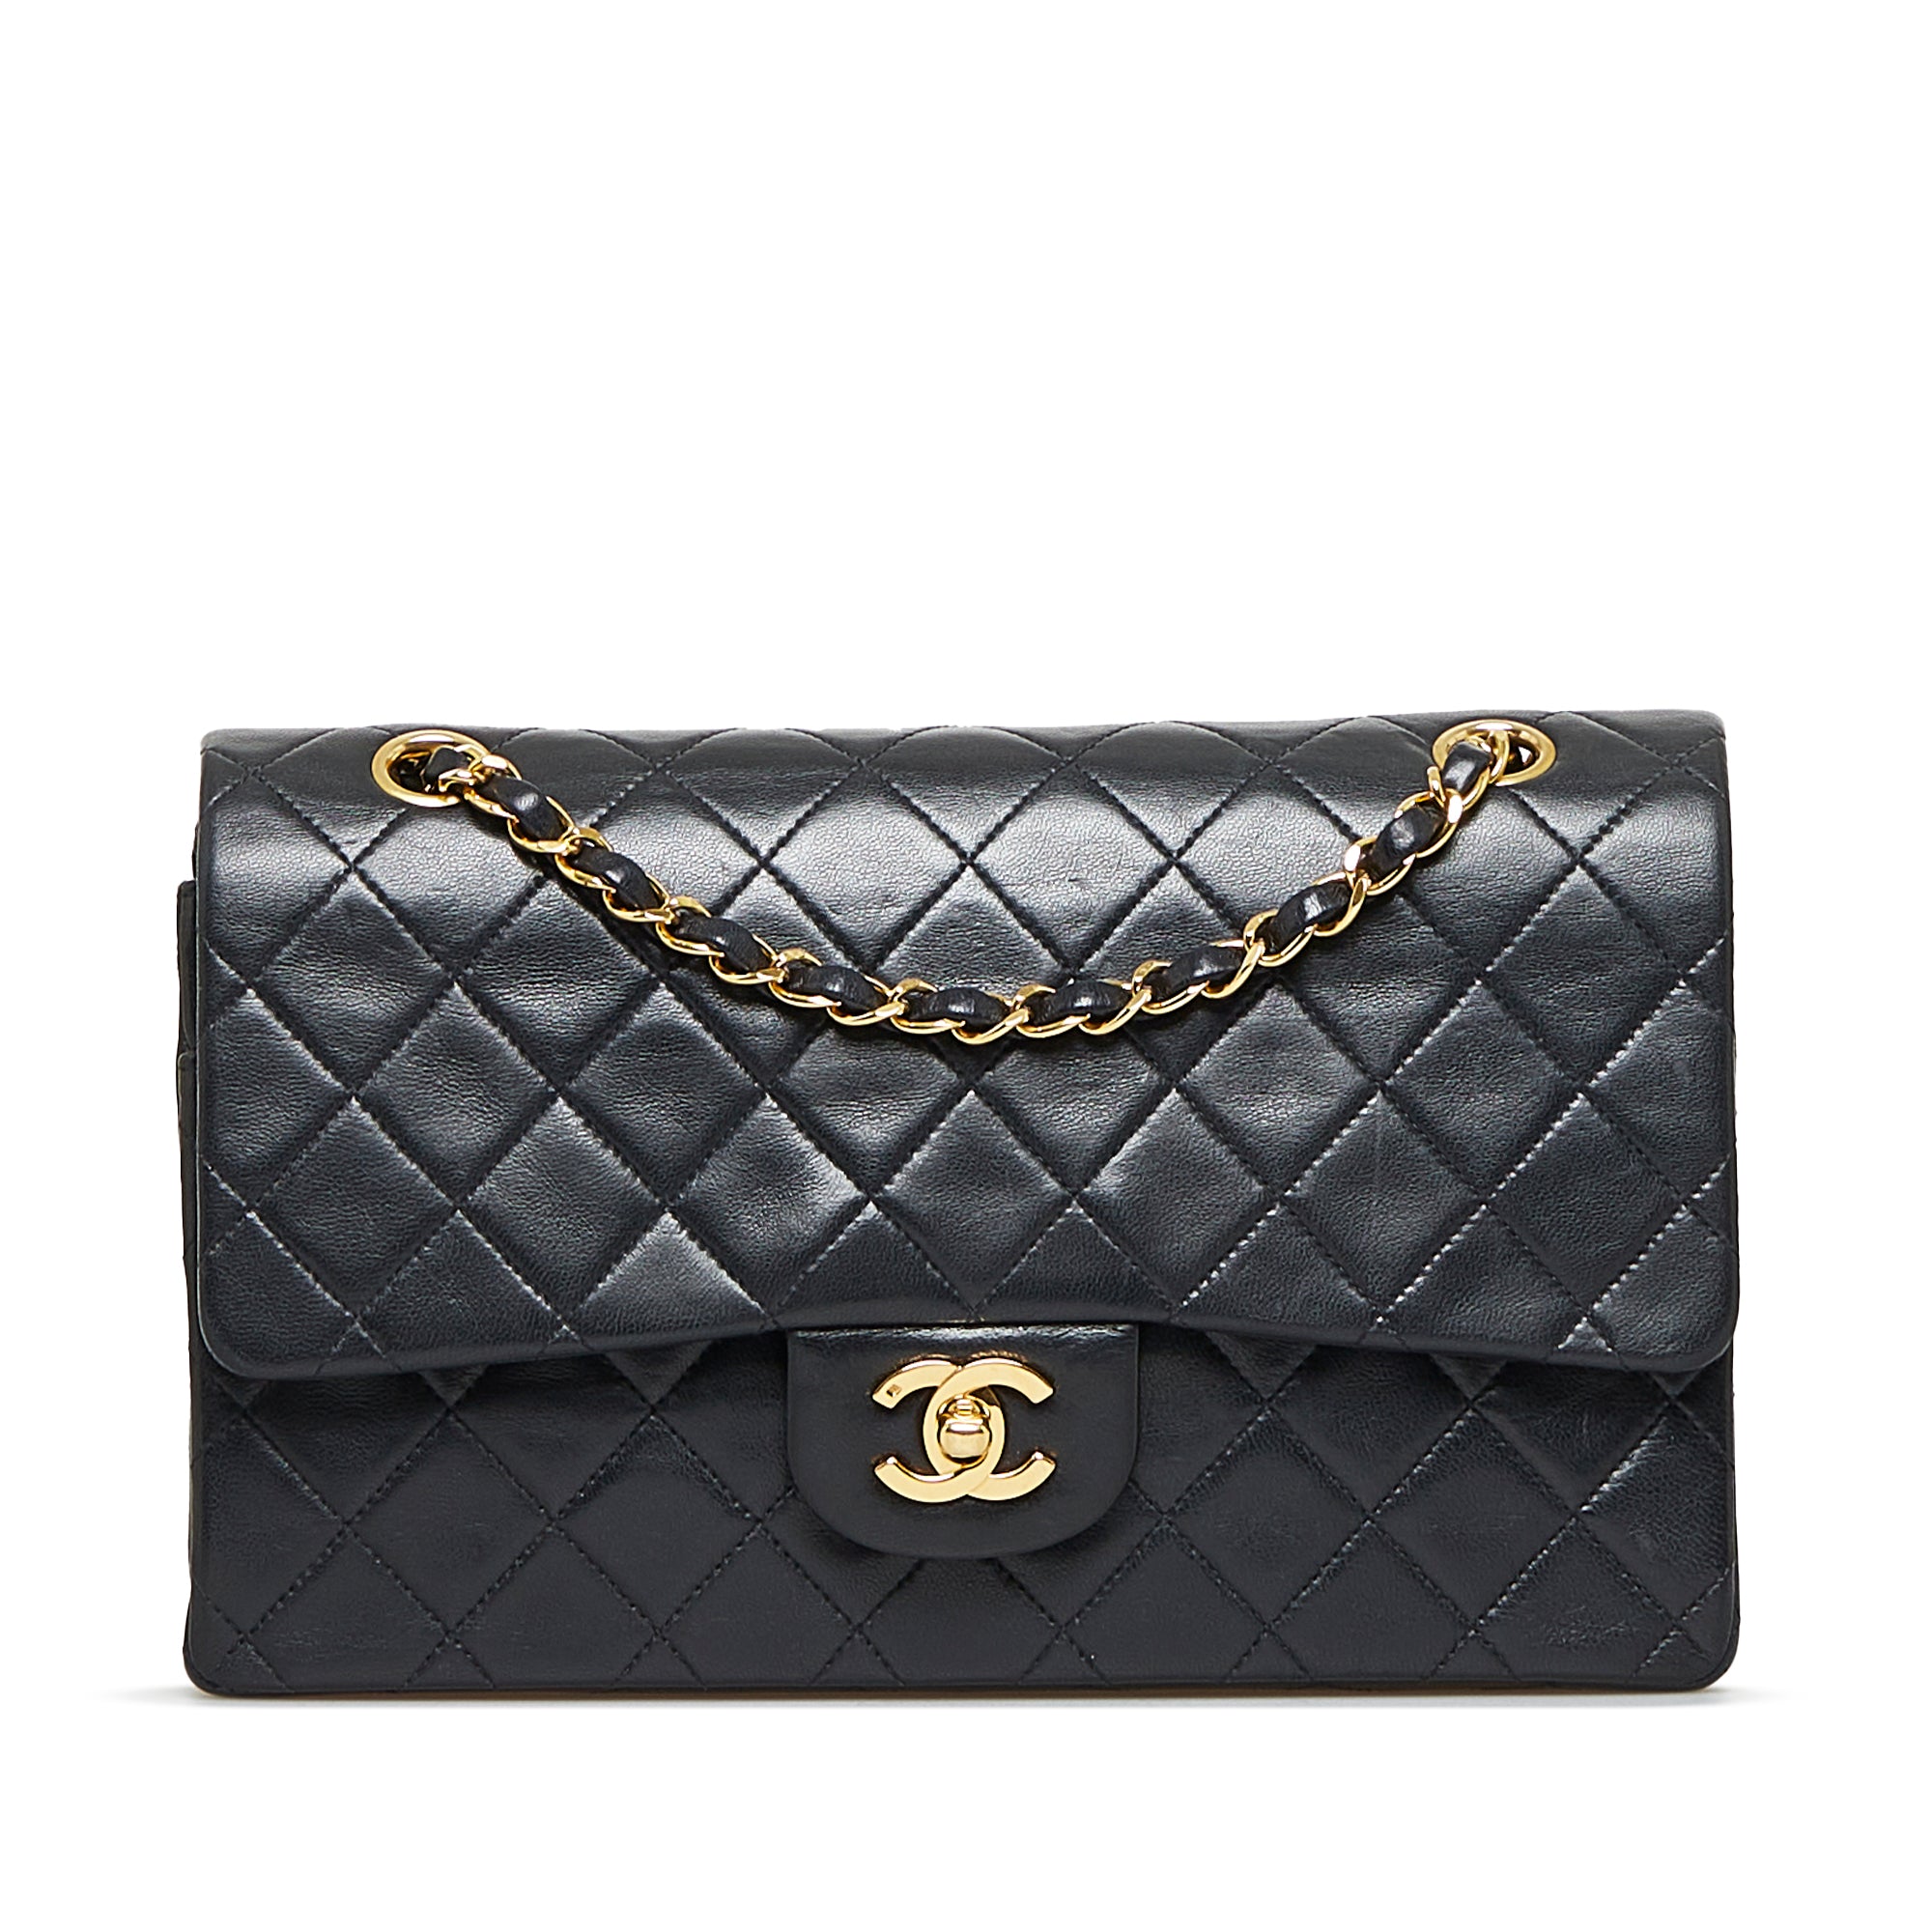 Black Chanel Boots Medium Classic Lambskin Double Flap Shoulder Bag, Chanel  Boots threw a fine jewelry party at Bergdorf Goodman in NYC during NYFW